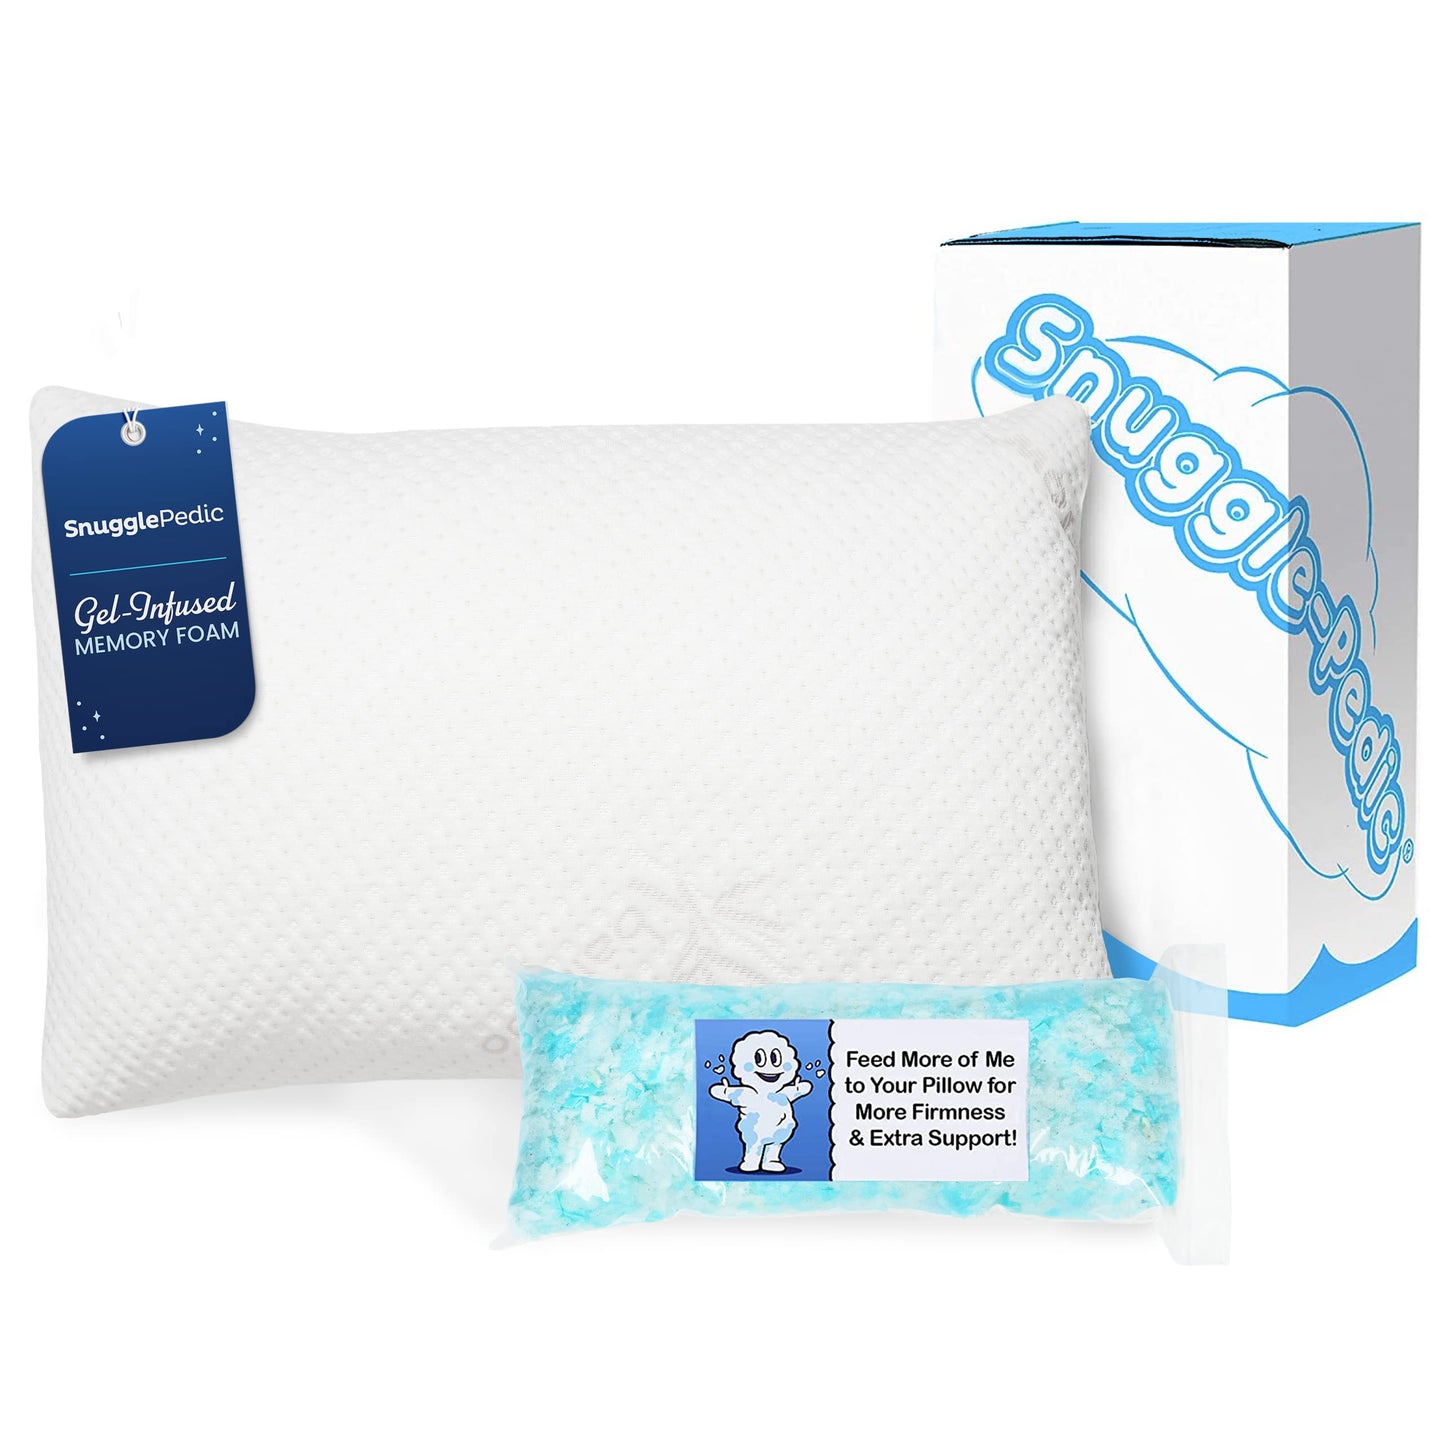 Snuggle-Pedic Gel Memory Foam Cooling Pillow Shredded Memory Foam Pillows for Side, Stomach & Back Sleepers - Keeps Shape - College Dorm Room Essentials for Girls and Guys - Queen